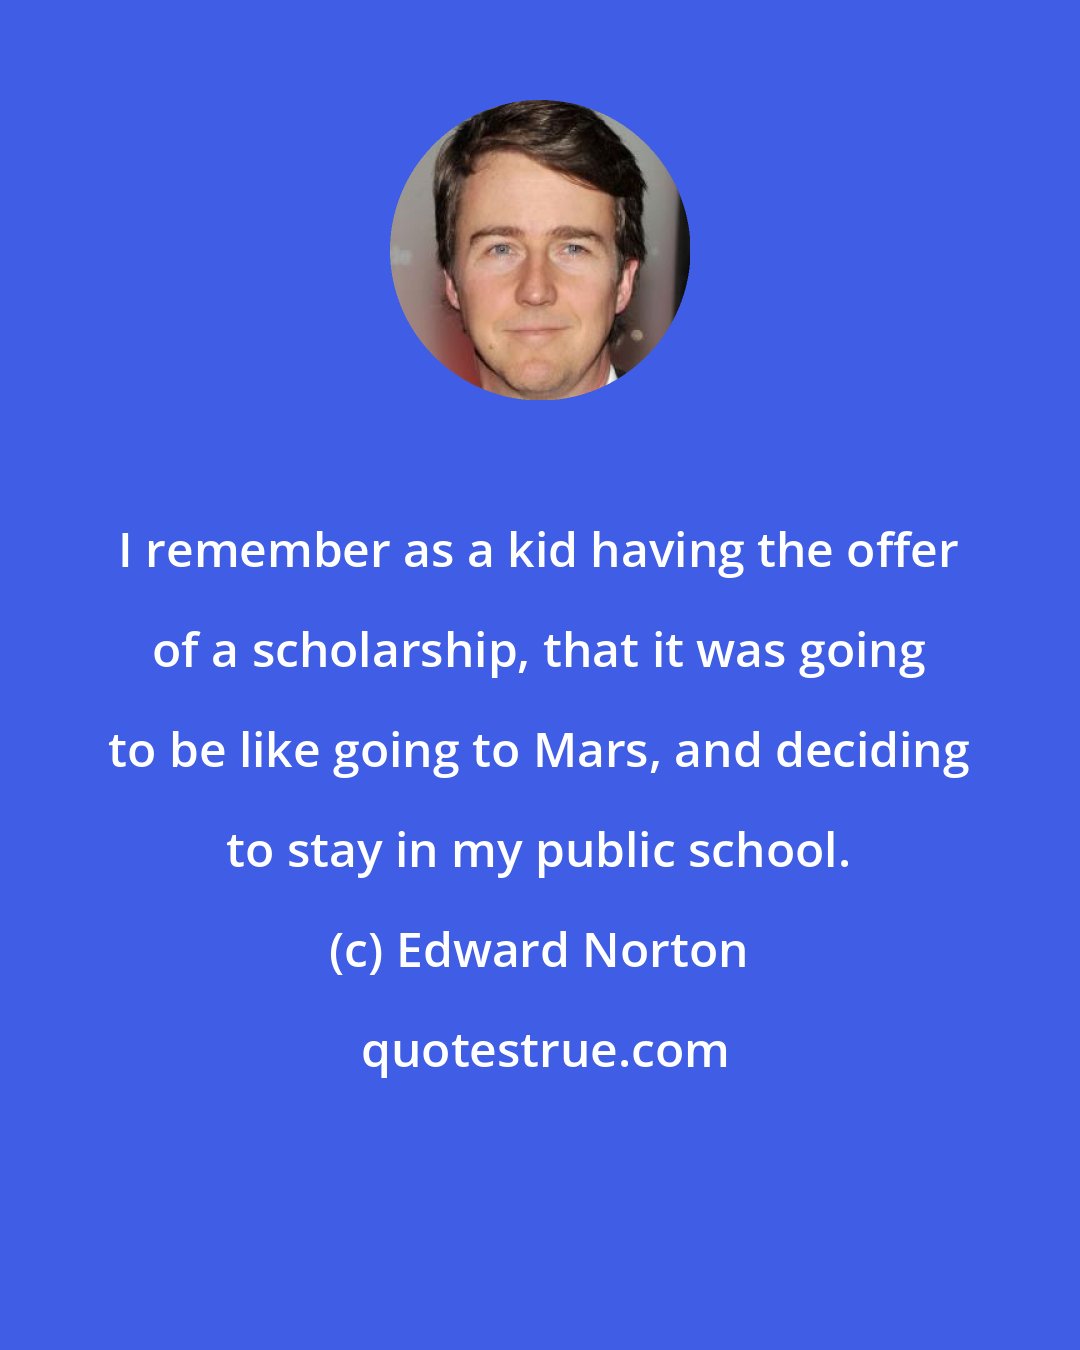 Edward Norton: I remember as a kid having the offer of a scholarship, that it was going to be like going to Mars, and deciding to stay in my public school.